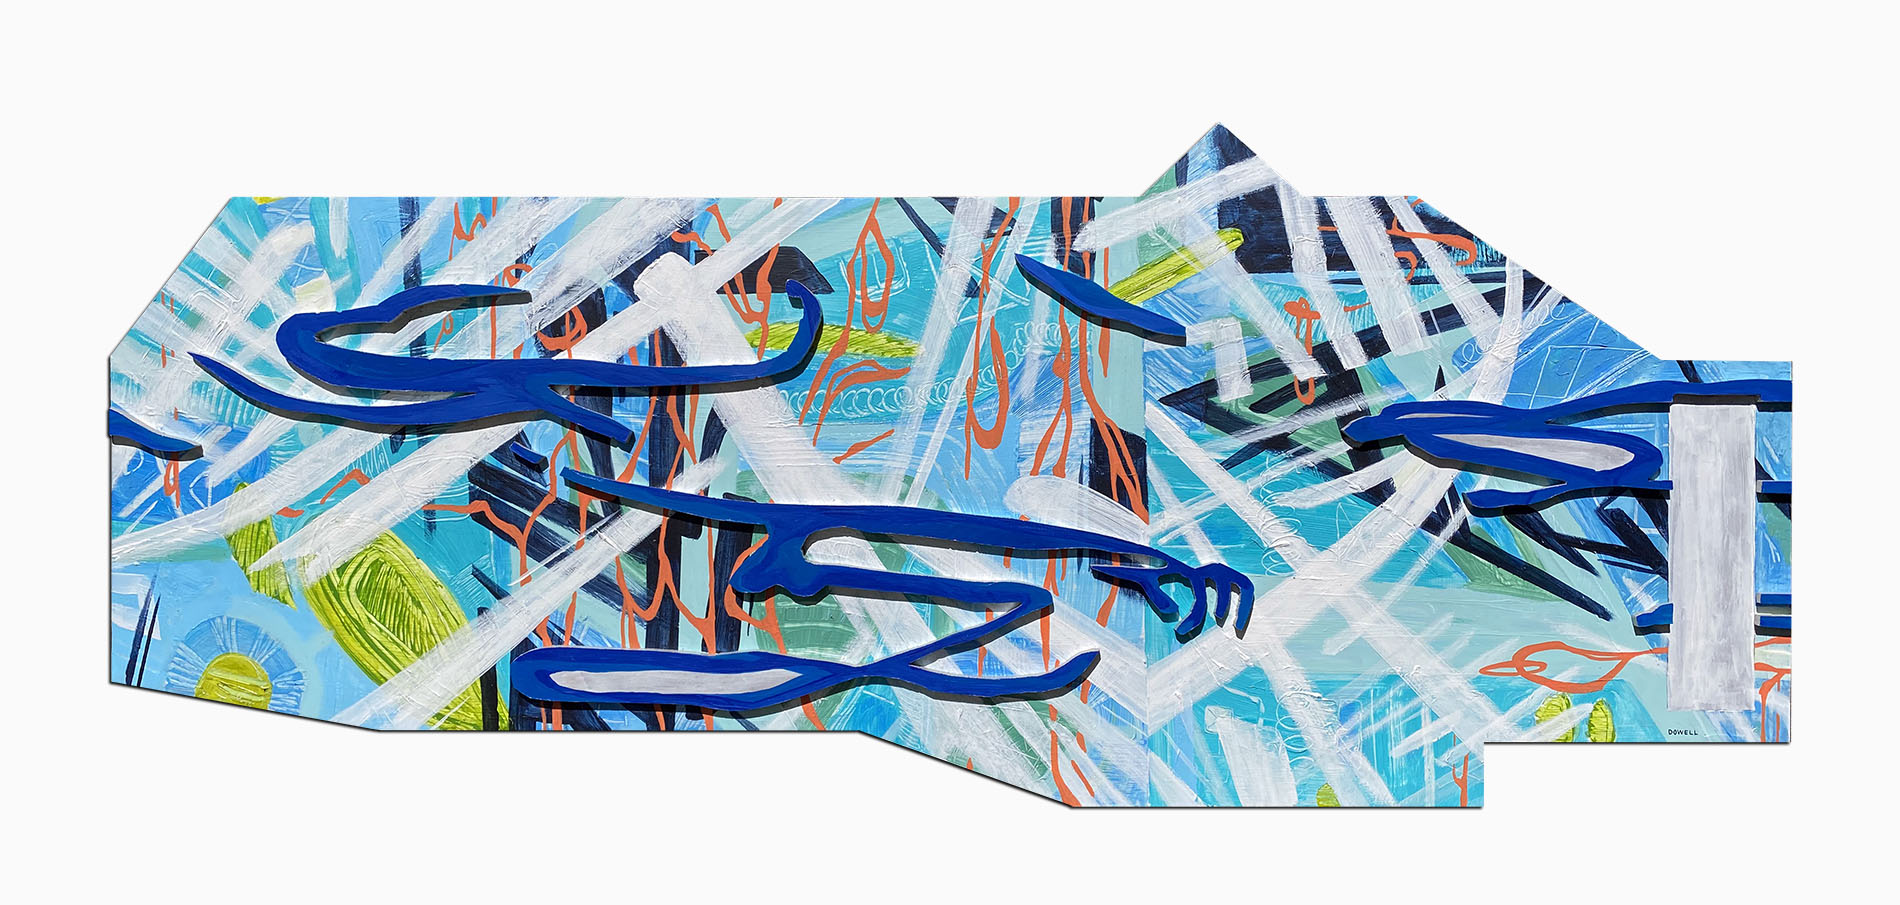 20″ x 48″ acrylic on cut wood panels of varying sizes. Polygon shape. Cobalt blue, shadowed lines in organic shapes layered over thick and thin white brush strokes, orange vine-like lines, and a cool blue background with lime green accents.